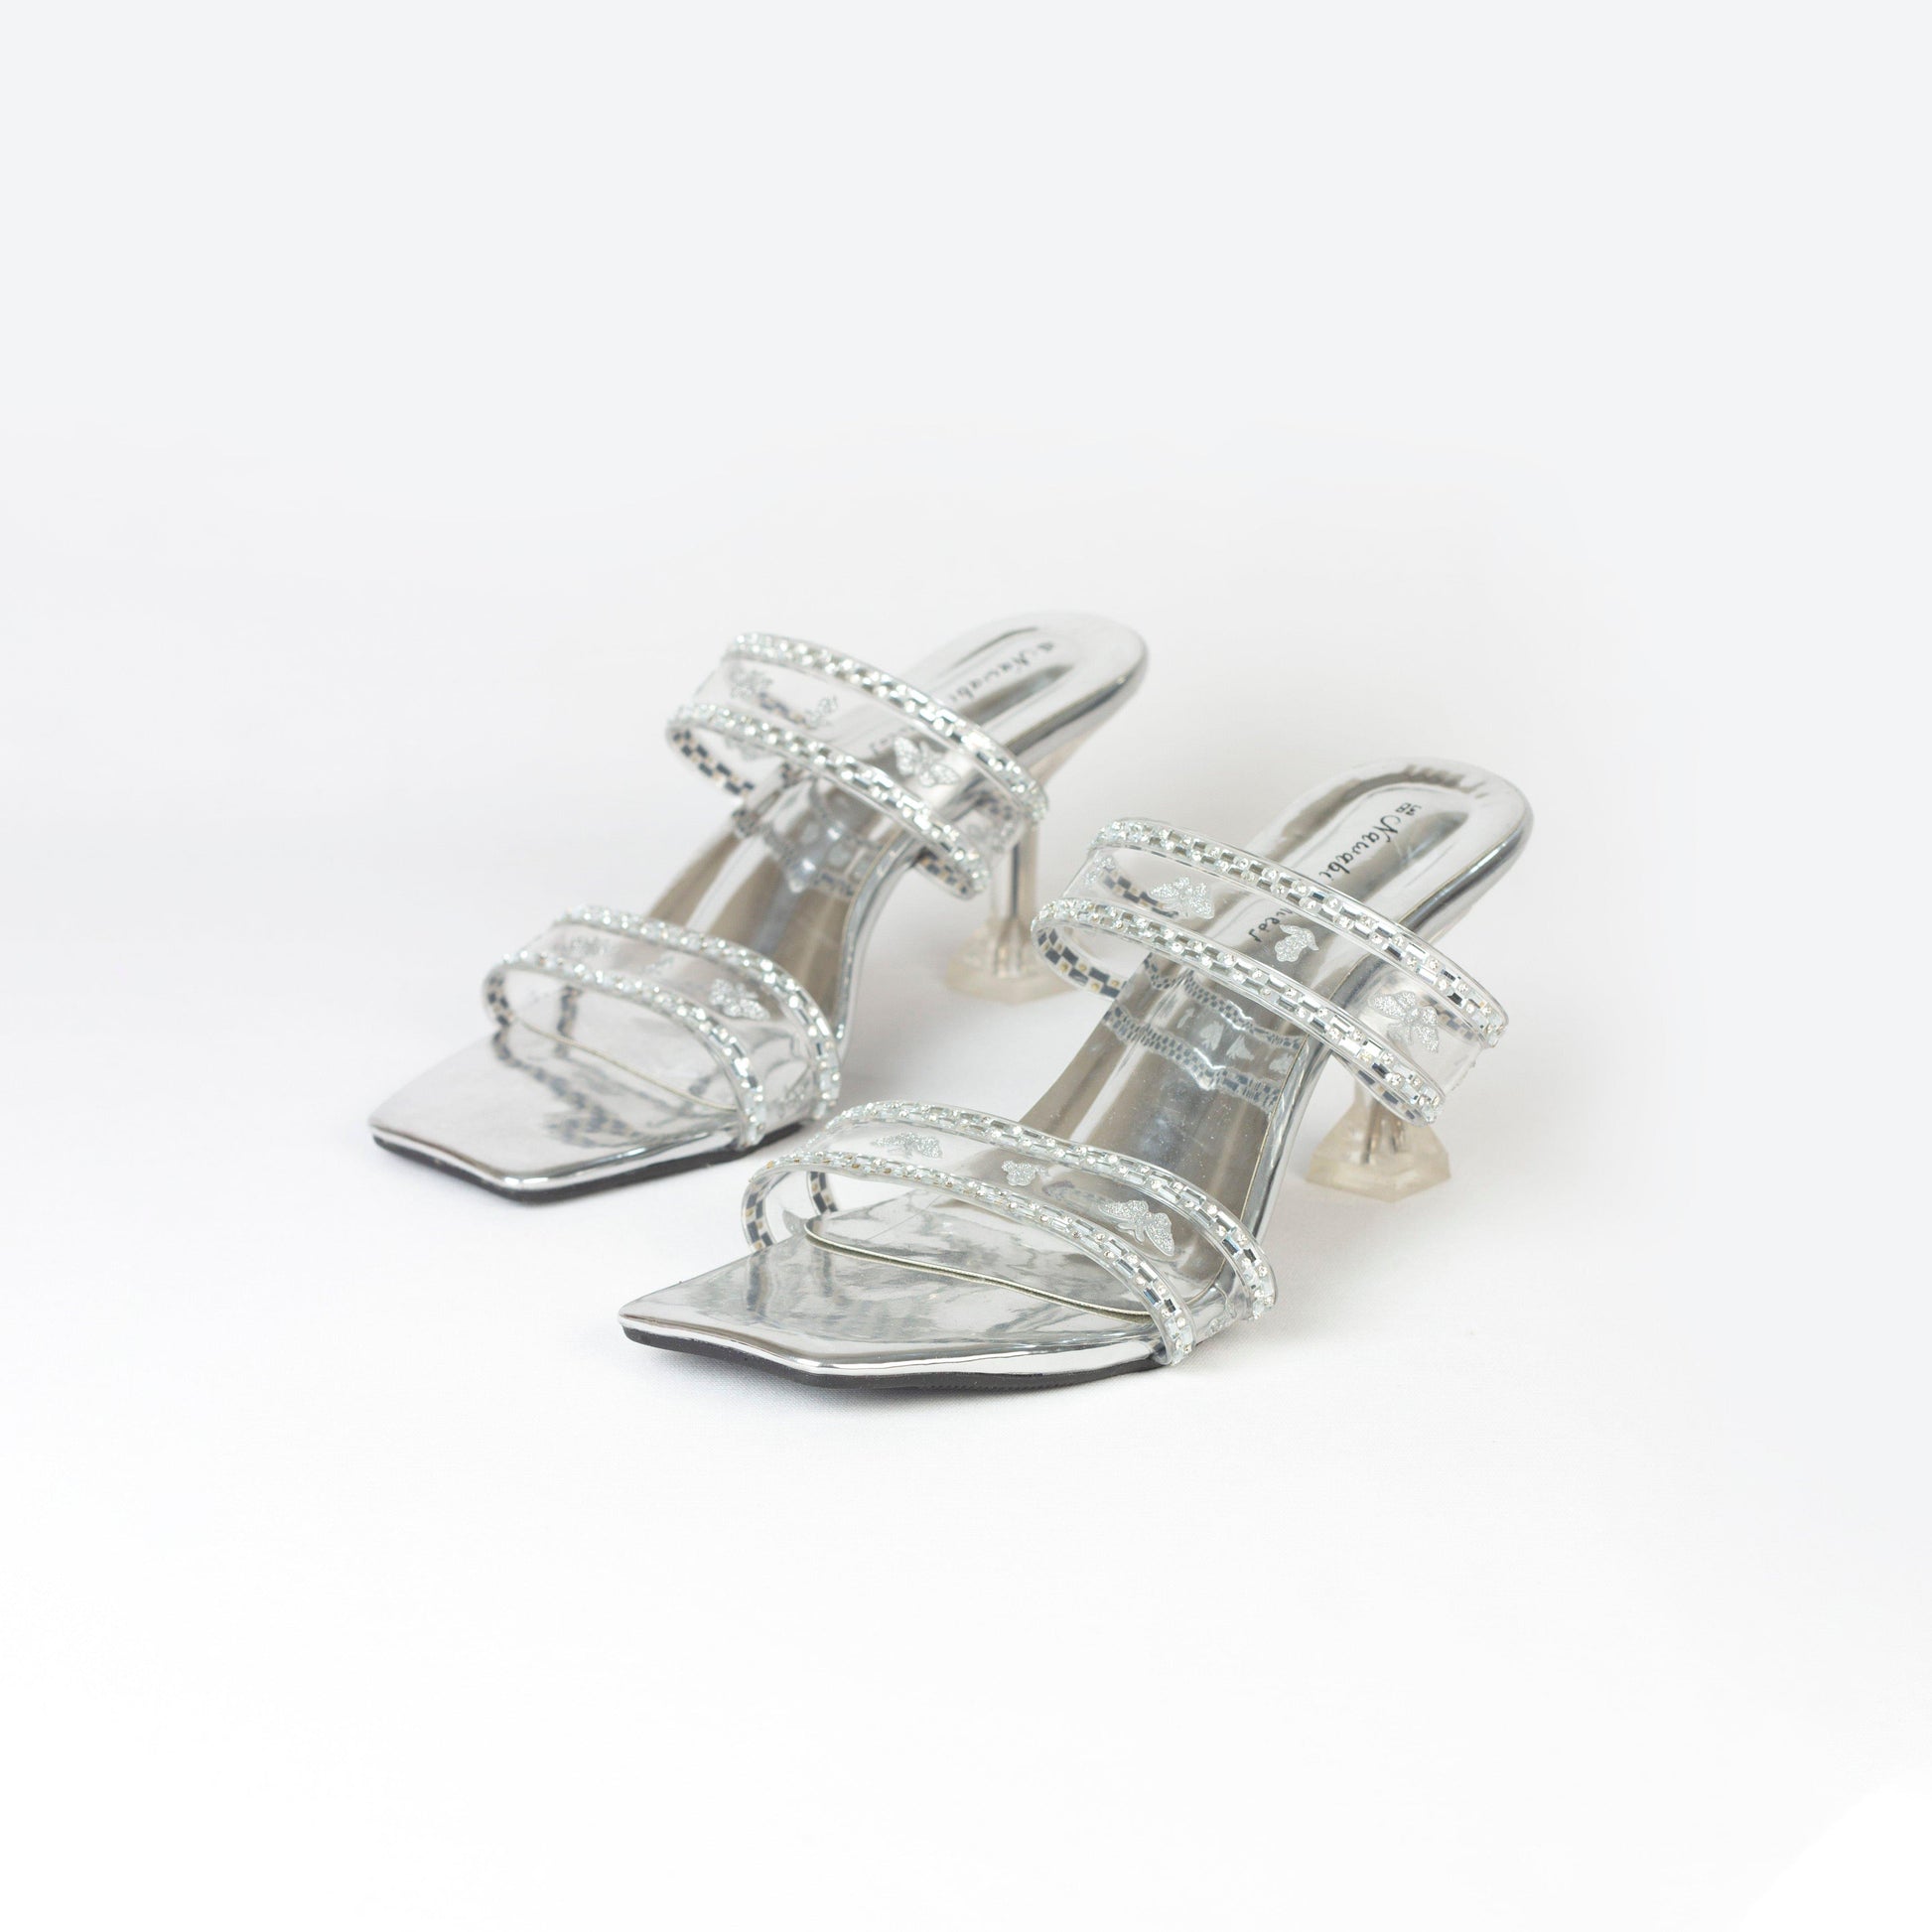 Nawabi Shoes BD Shoes 35 / silver Transparent Heels: The Must-Have Shoe Trend